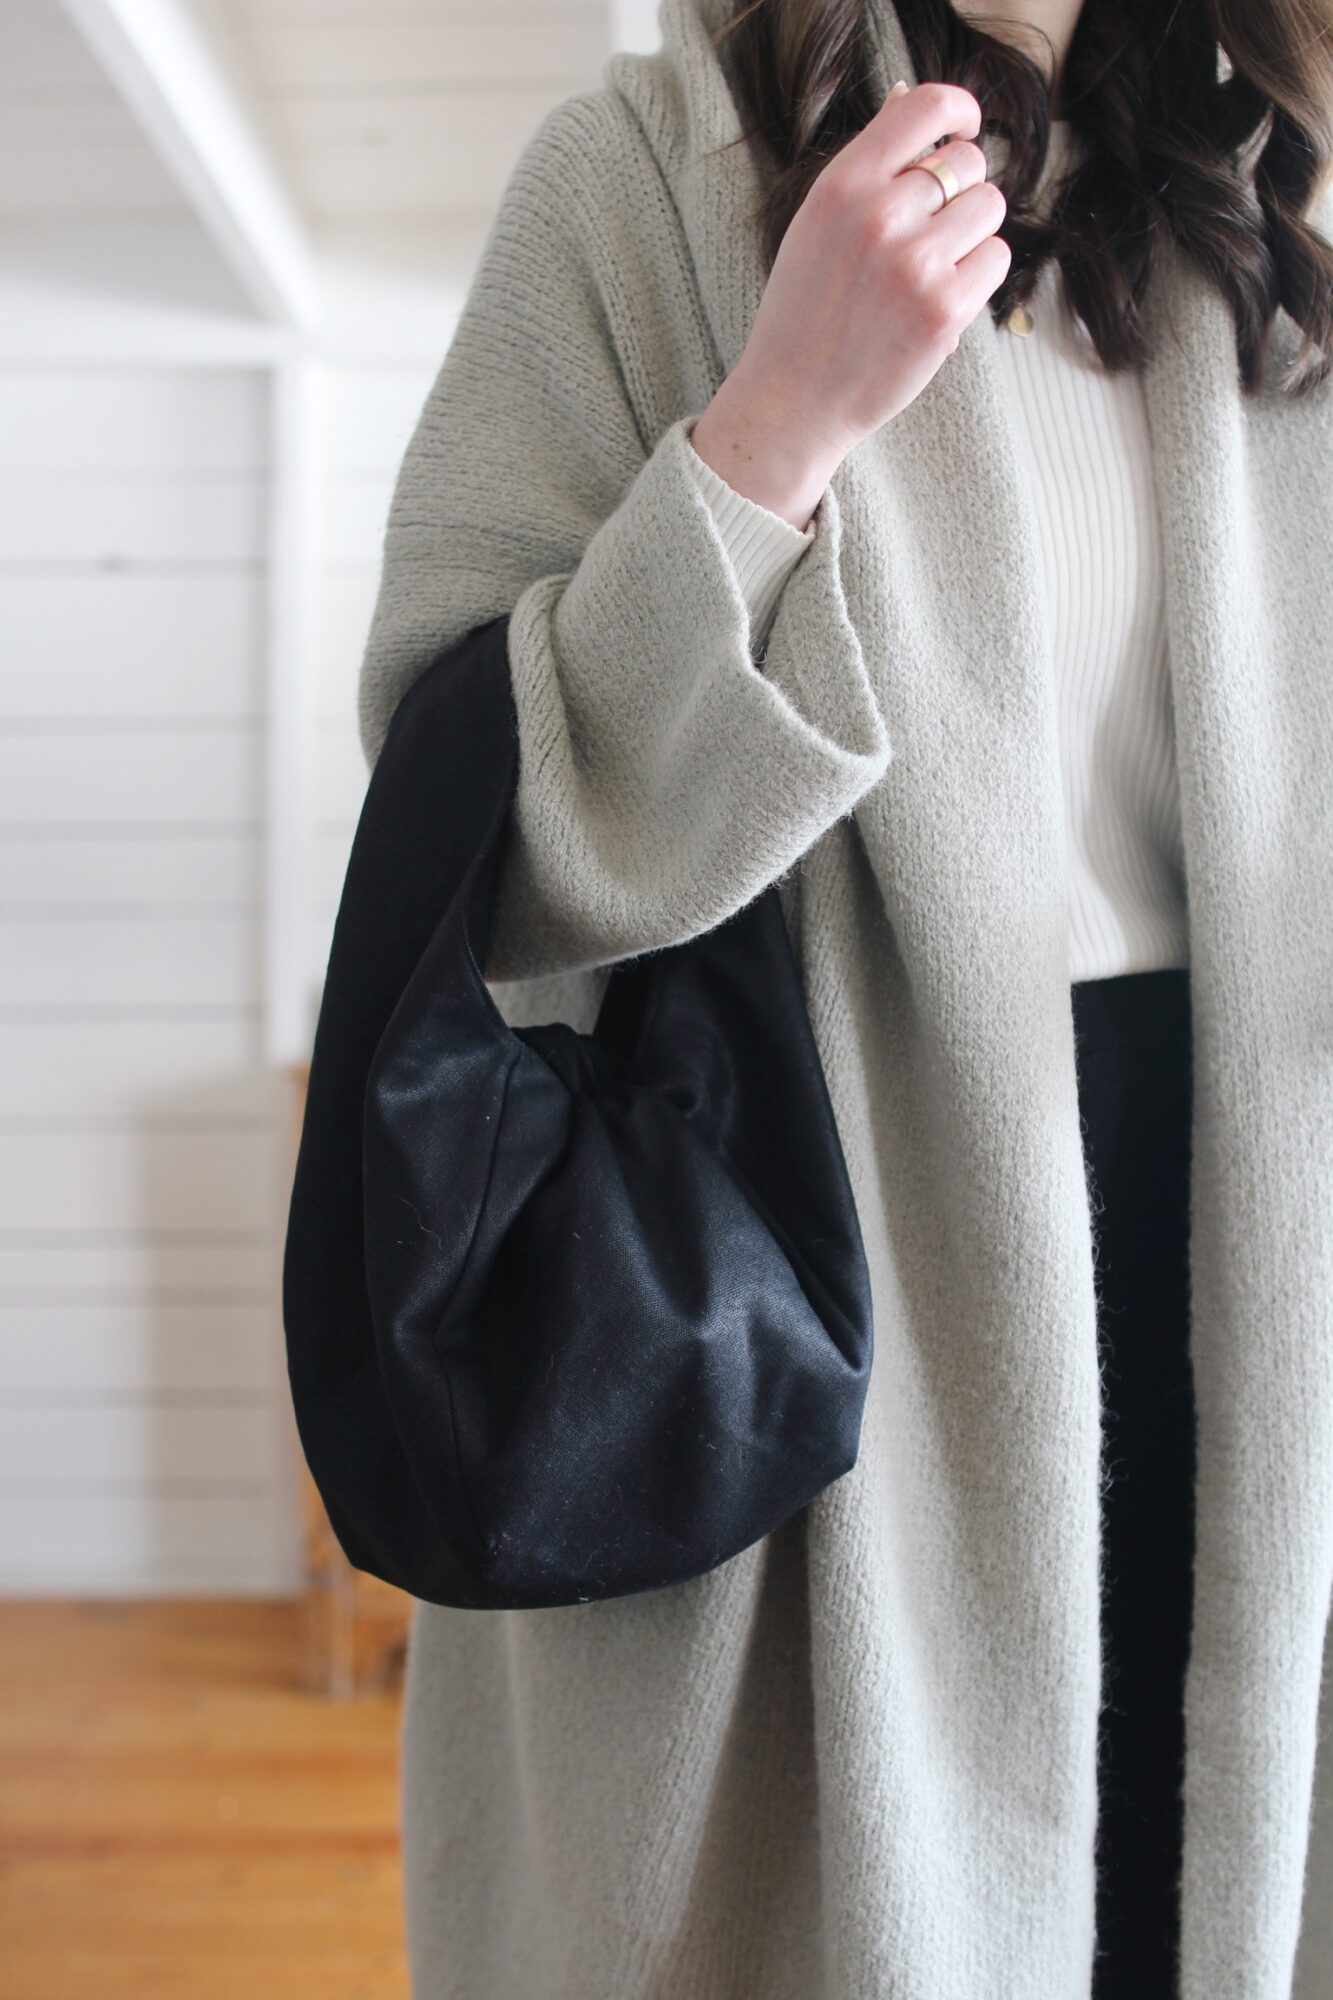 Style Bee - CAPOTE COAT, RIB KNIT, LOUNGE PANTS, CONVERSE AND A KNOT BAG